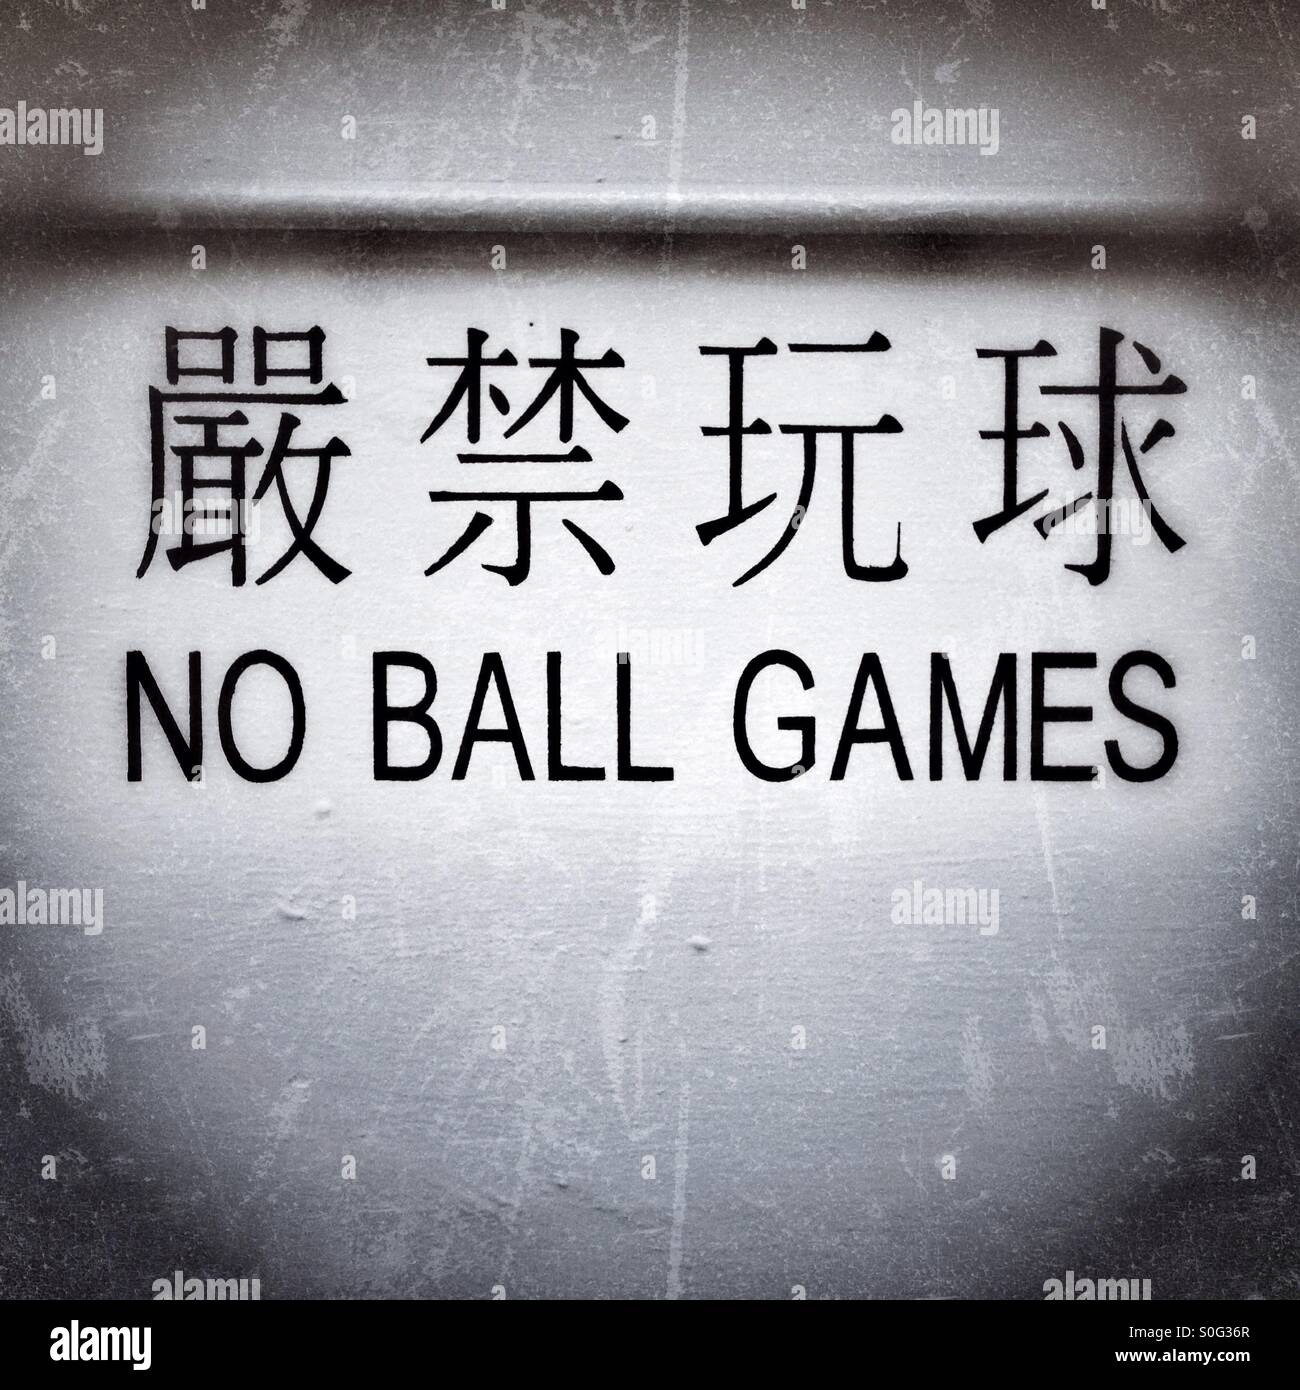 Sign in public housing block saying 'No Ball Games' in English and Chinese, Kowloon, Hong Kong Stock Photo